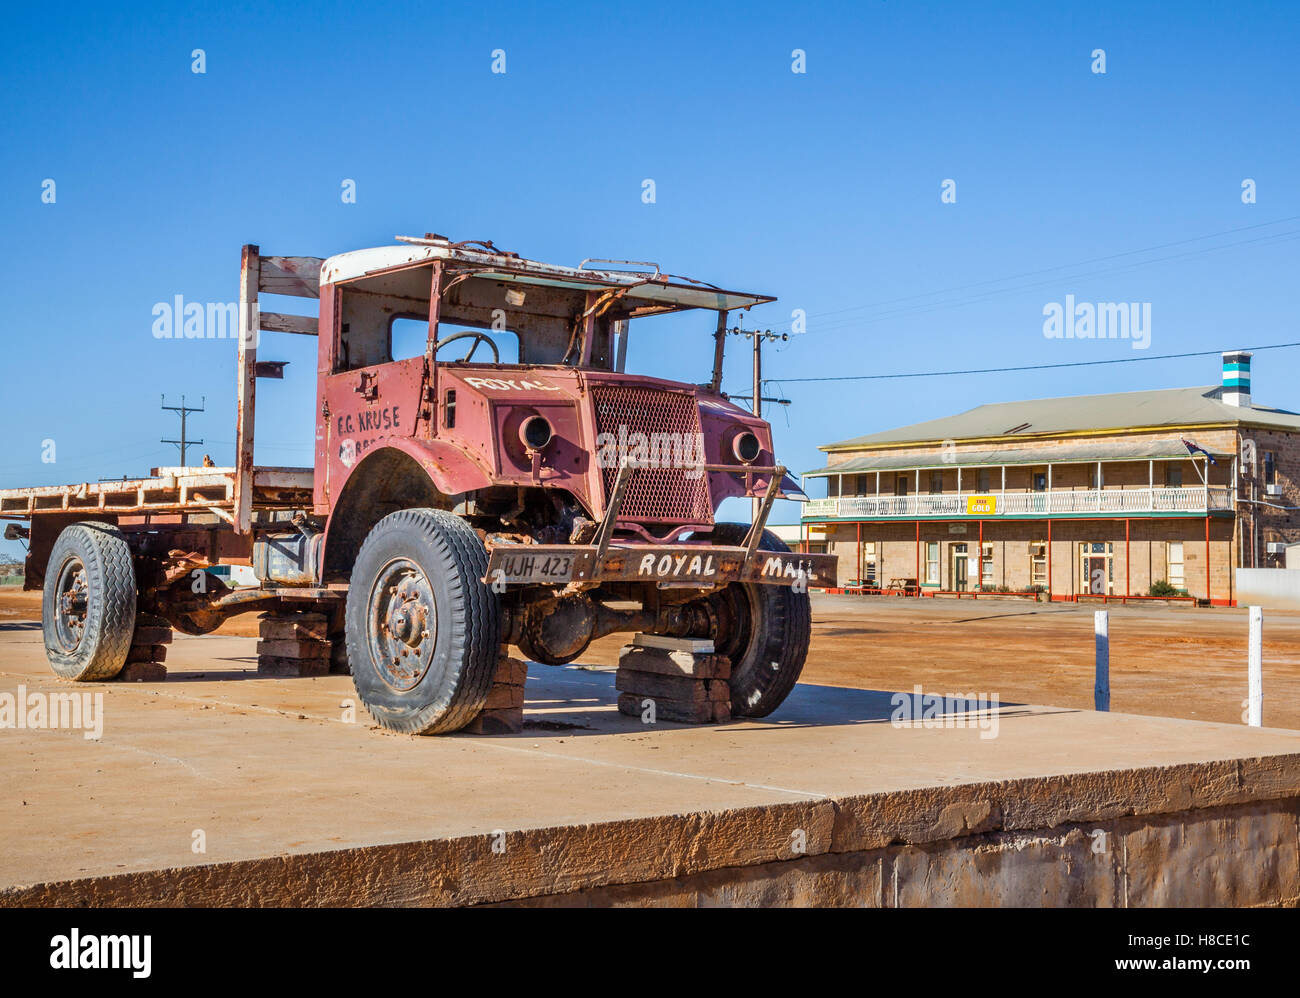 Marree in South Australia, Marree Hotel, vintage 1940s Chevrolet Blitz truck as it was used on outback mail runs Stock Photo